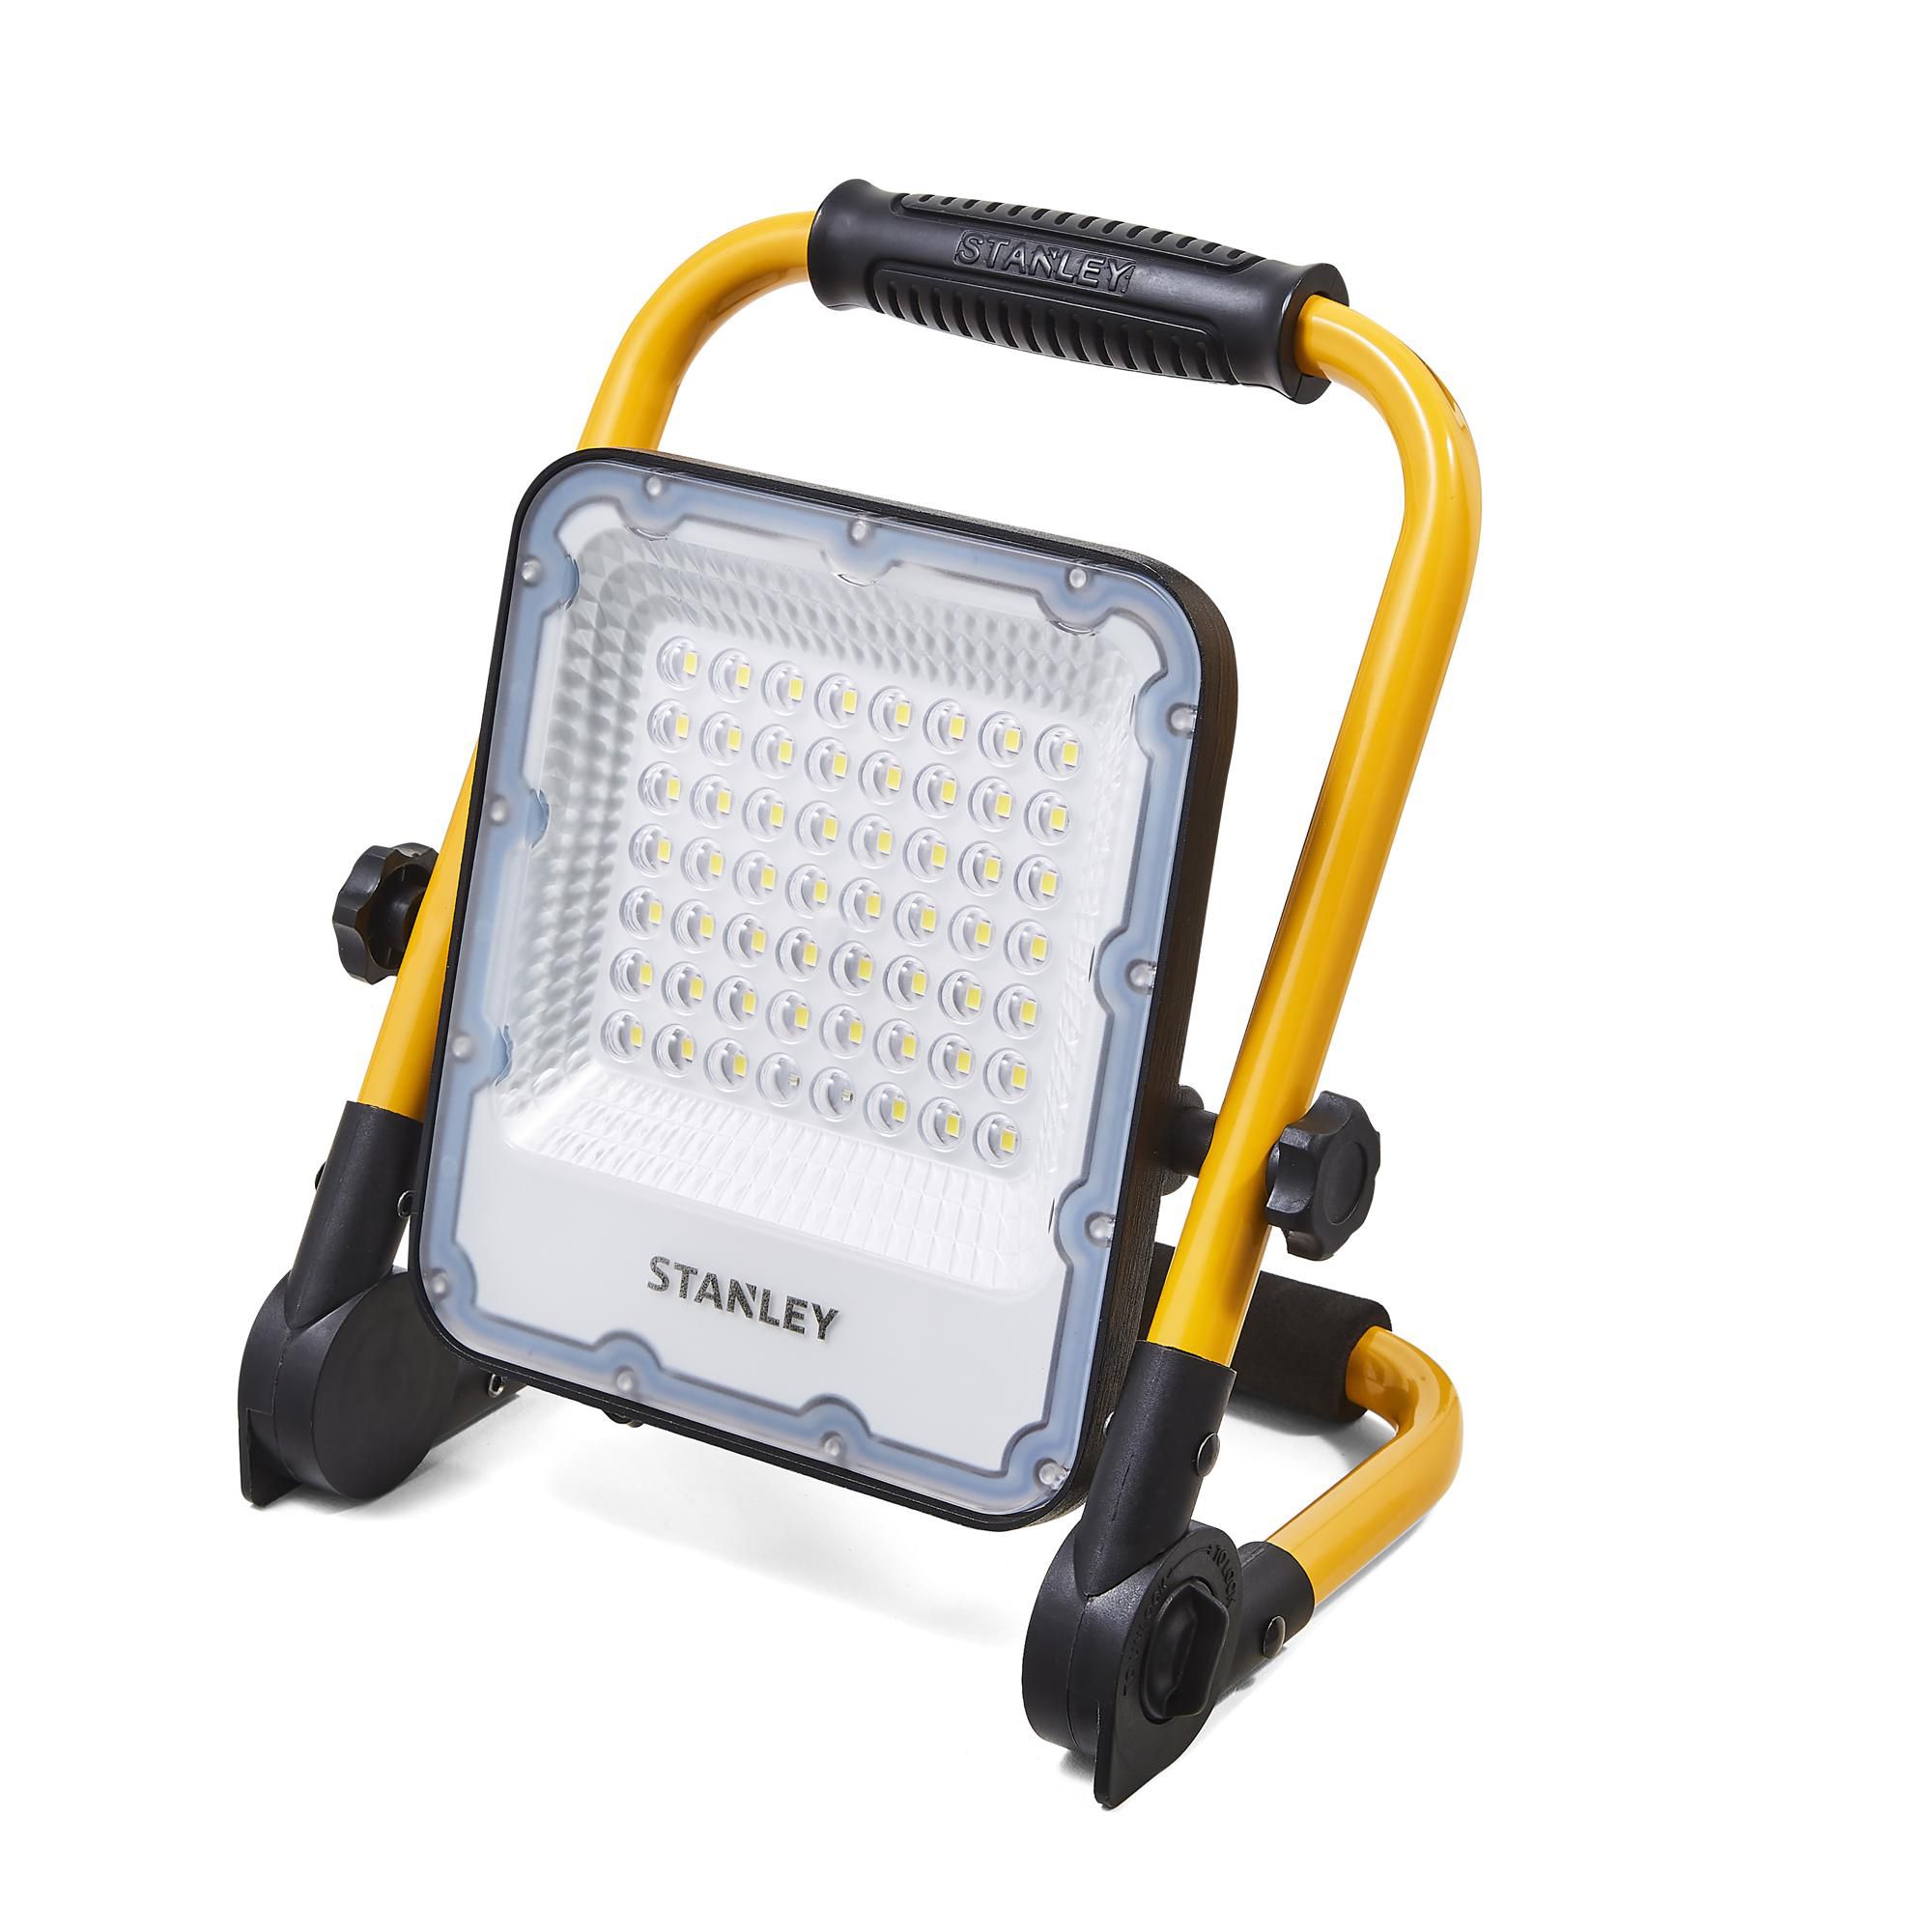 https://media.diy.com/is/image/Kingfisher/stanley-3-7v-20w-cordless-integrated-led-rechargeable-work-light-3000lm~5020024901720_02c?$MOB_PREV$&$width=618&$height=618